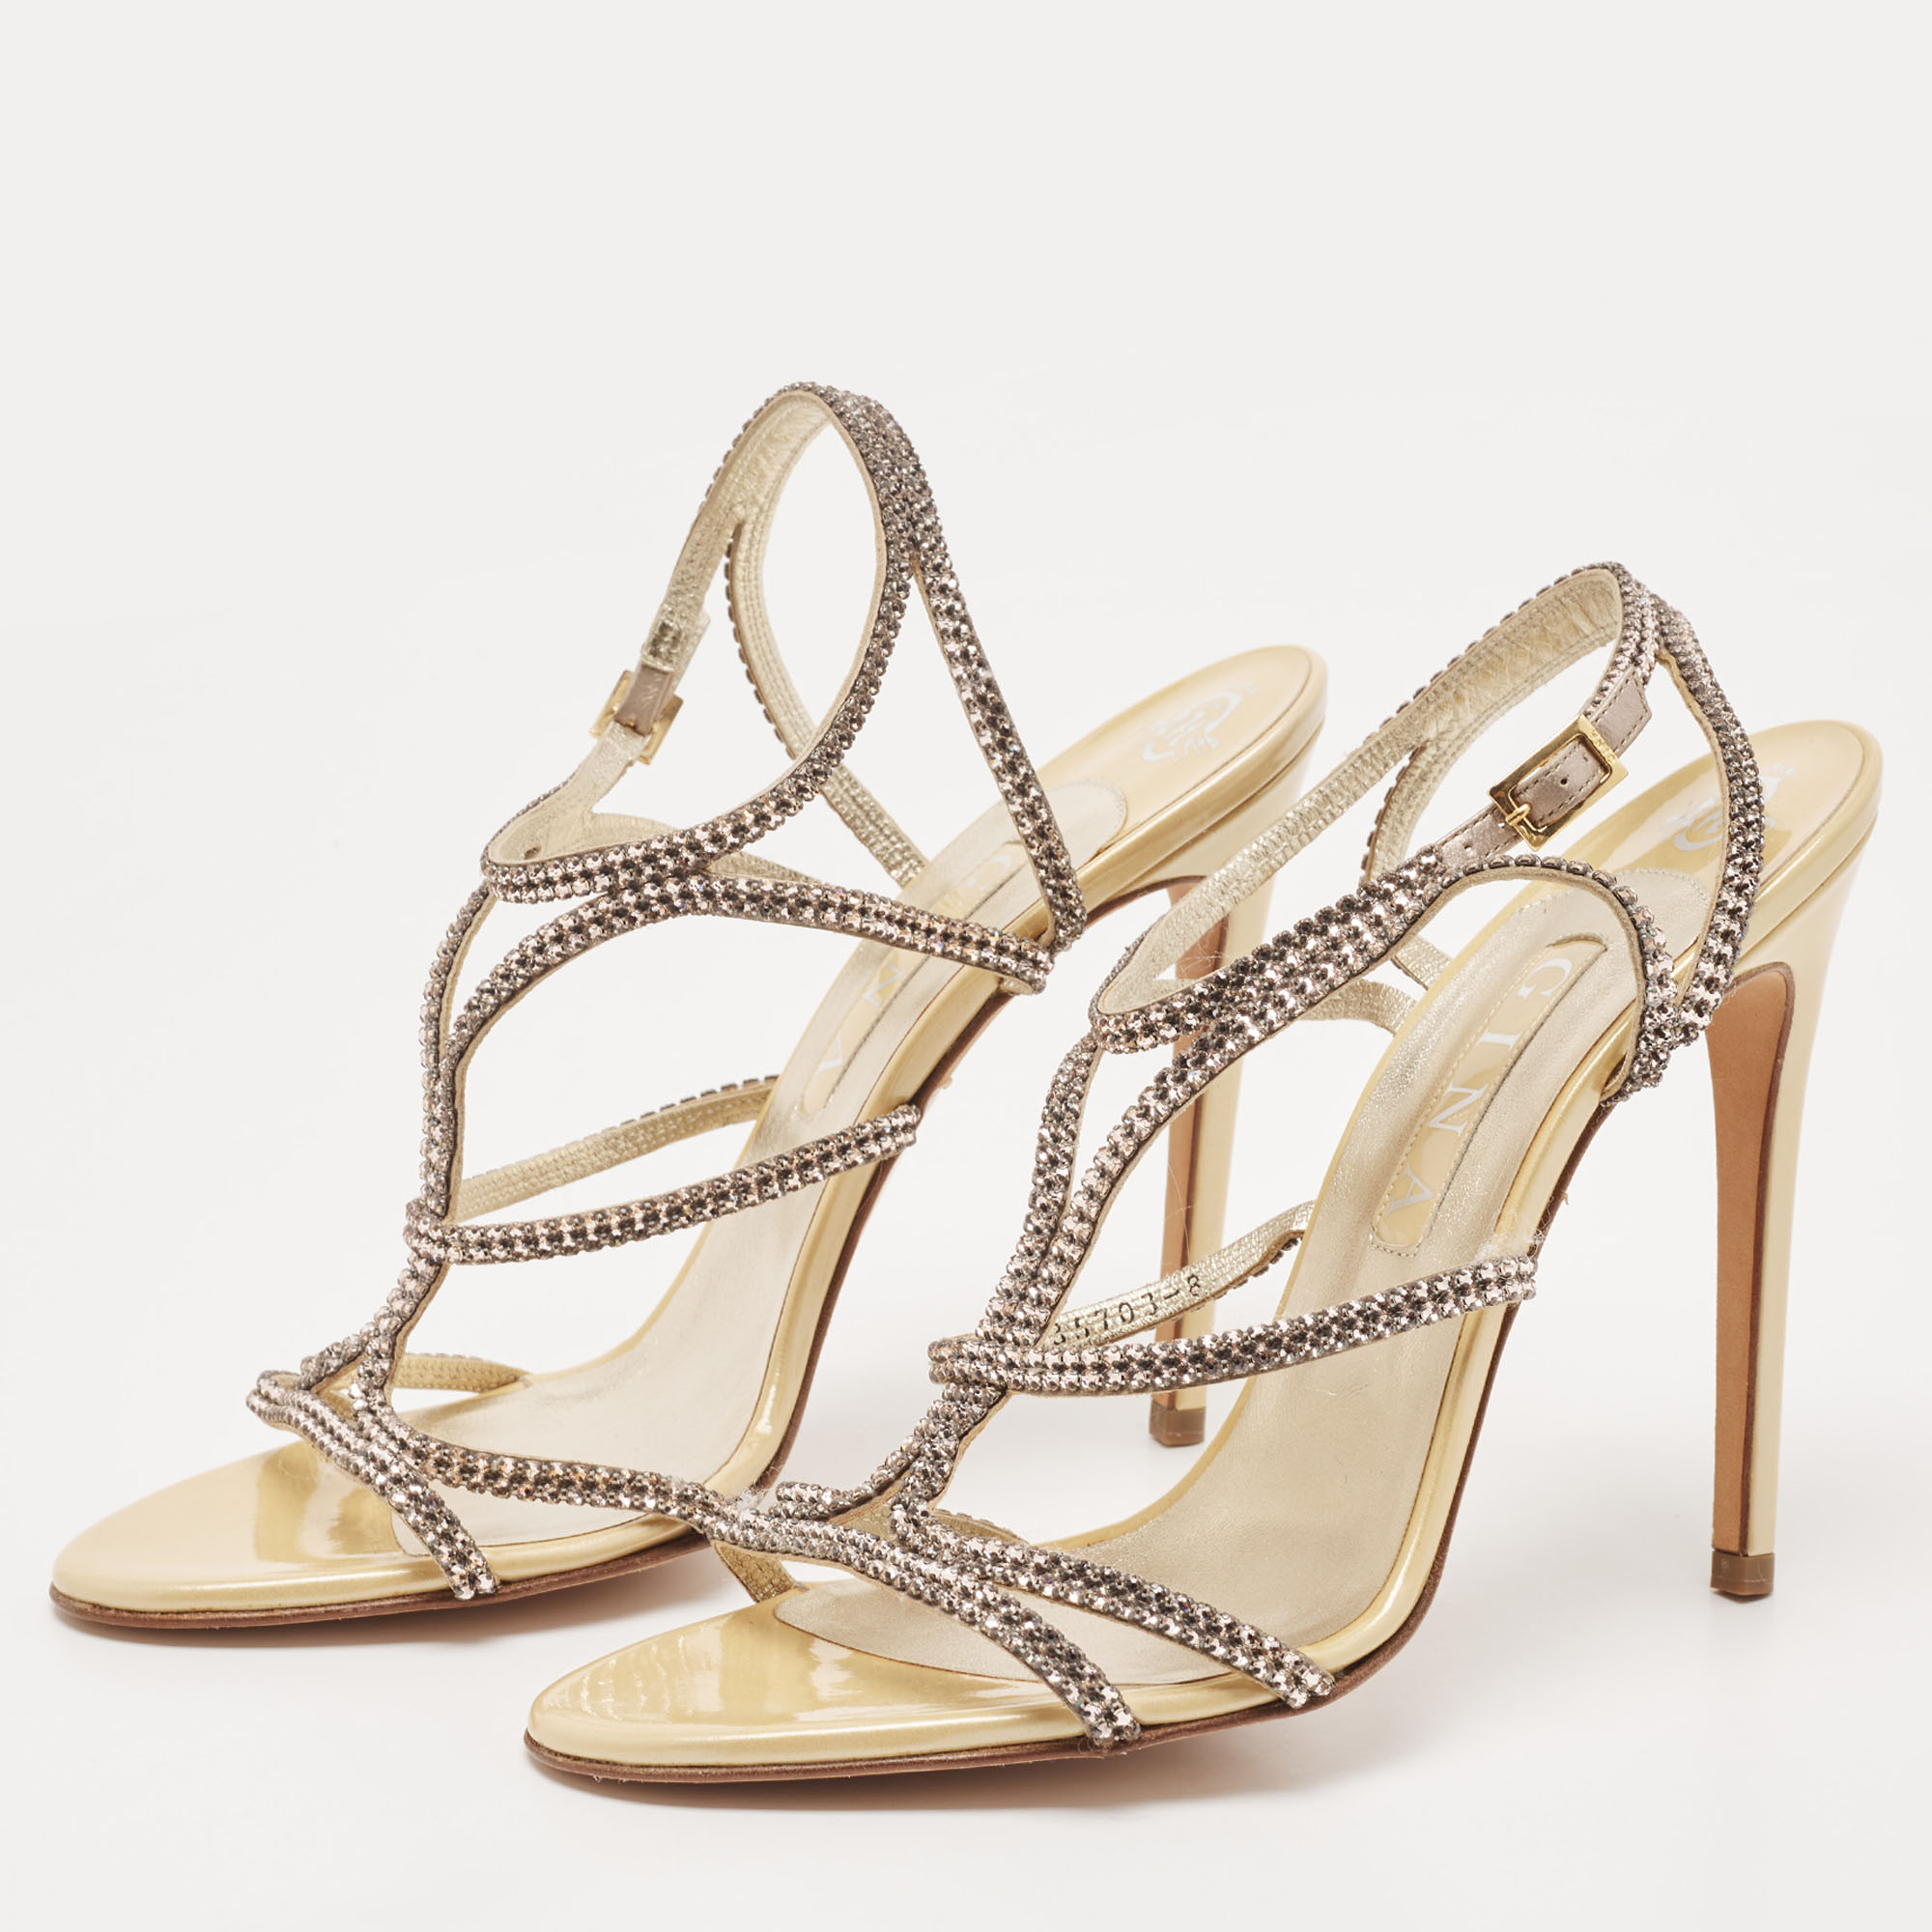 

Gina Metallic Beige Crystal Embellished Patent Leather Ankle Strap Sandals Size